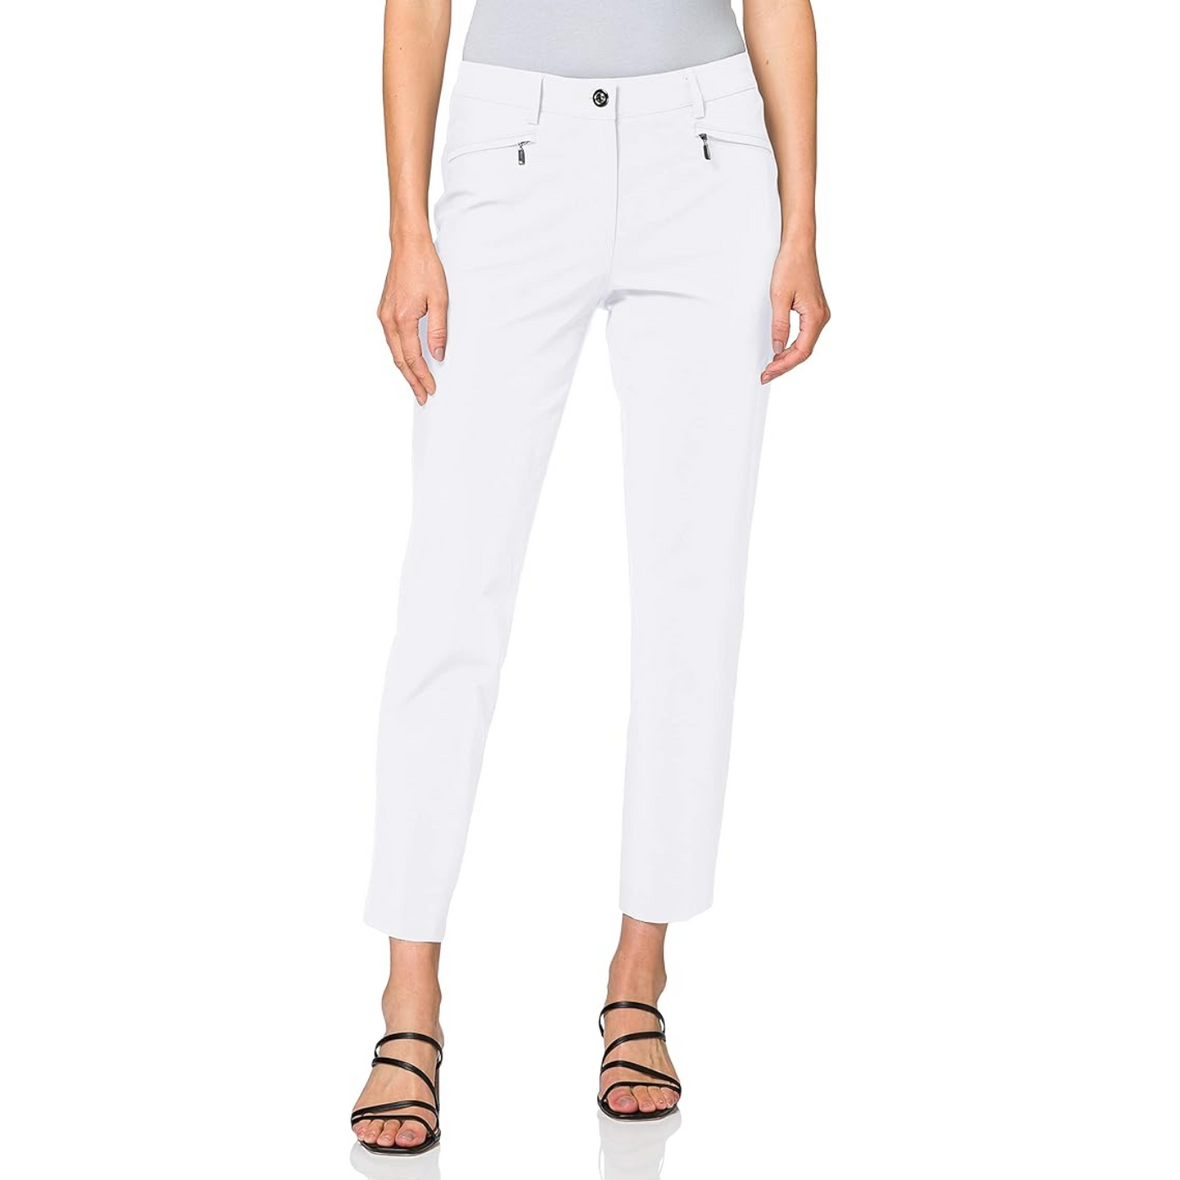 Front facing image of a model wearing white gardeur dina2 trousers with two  side zips